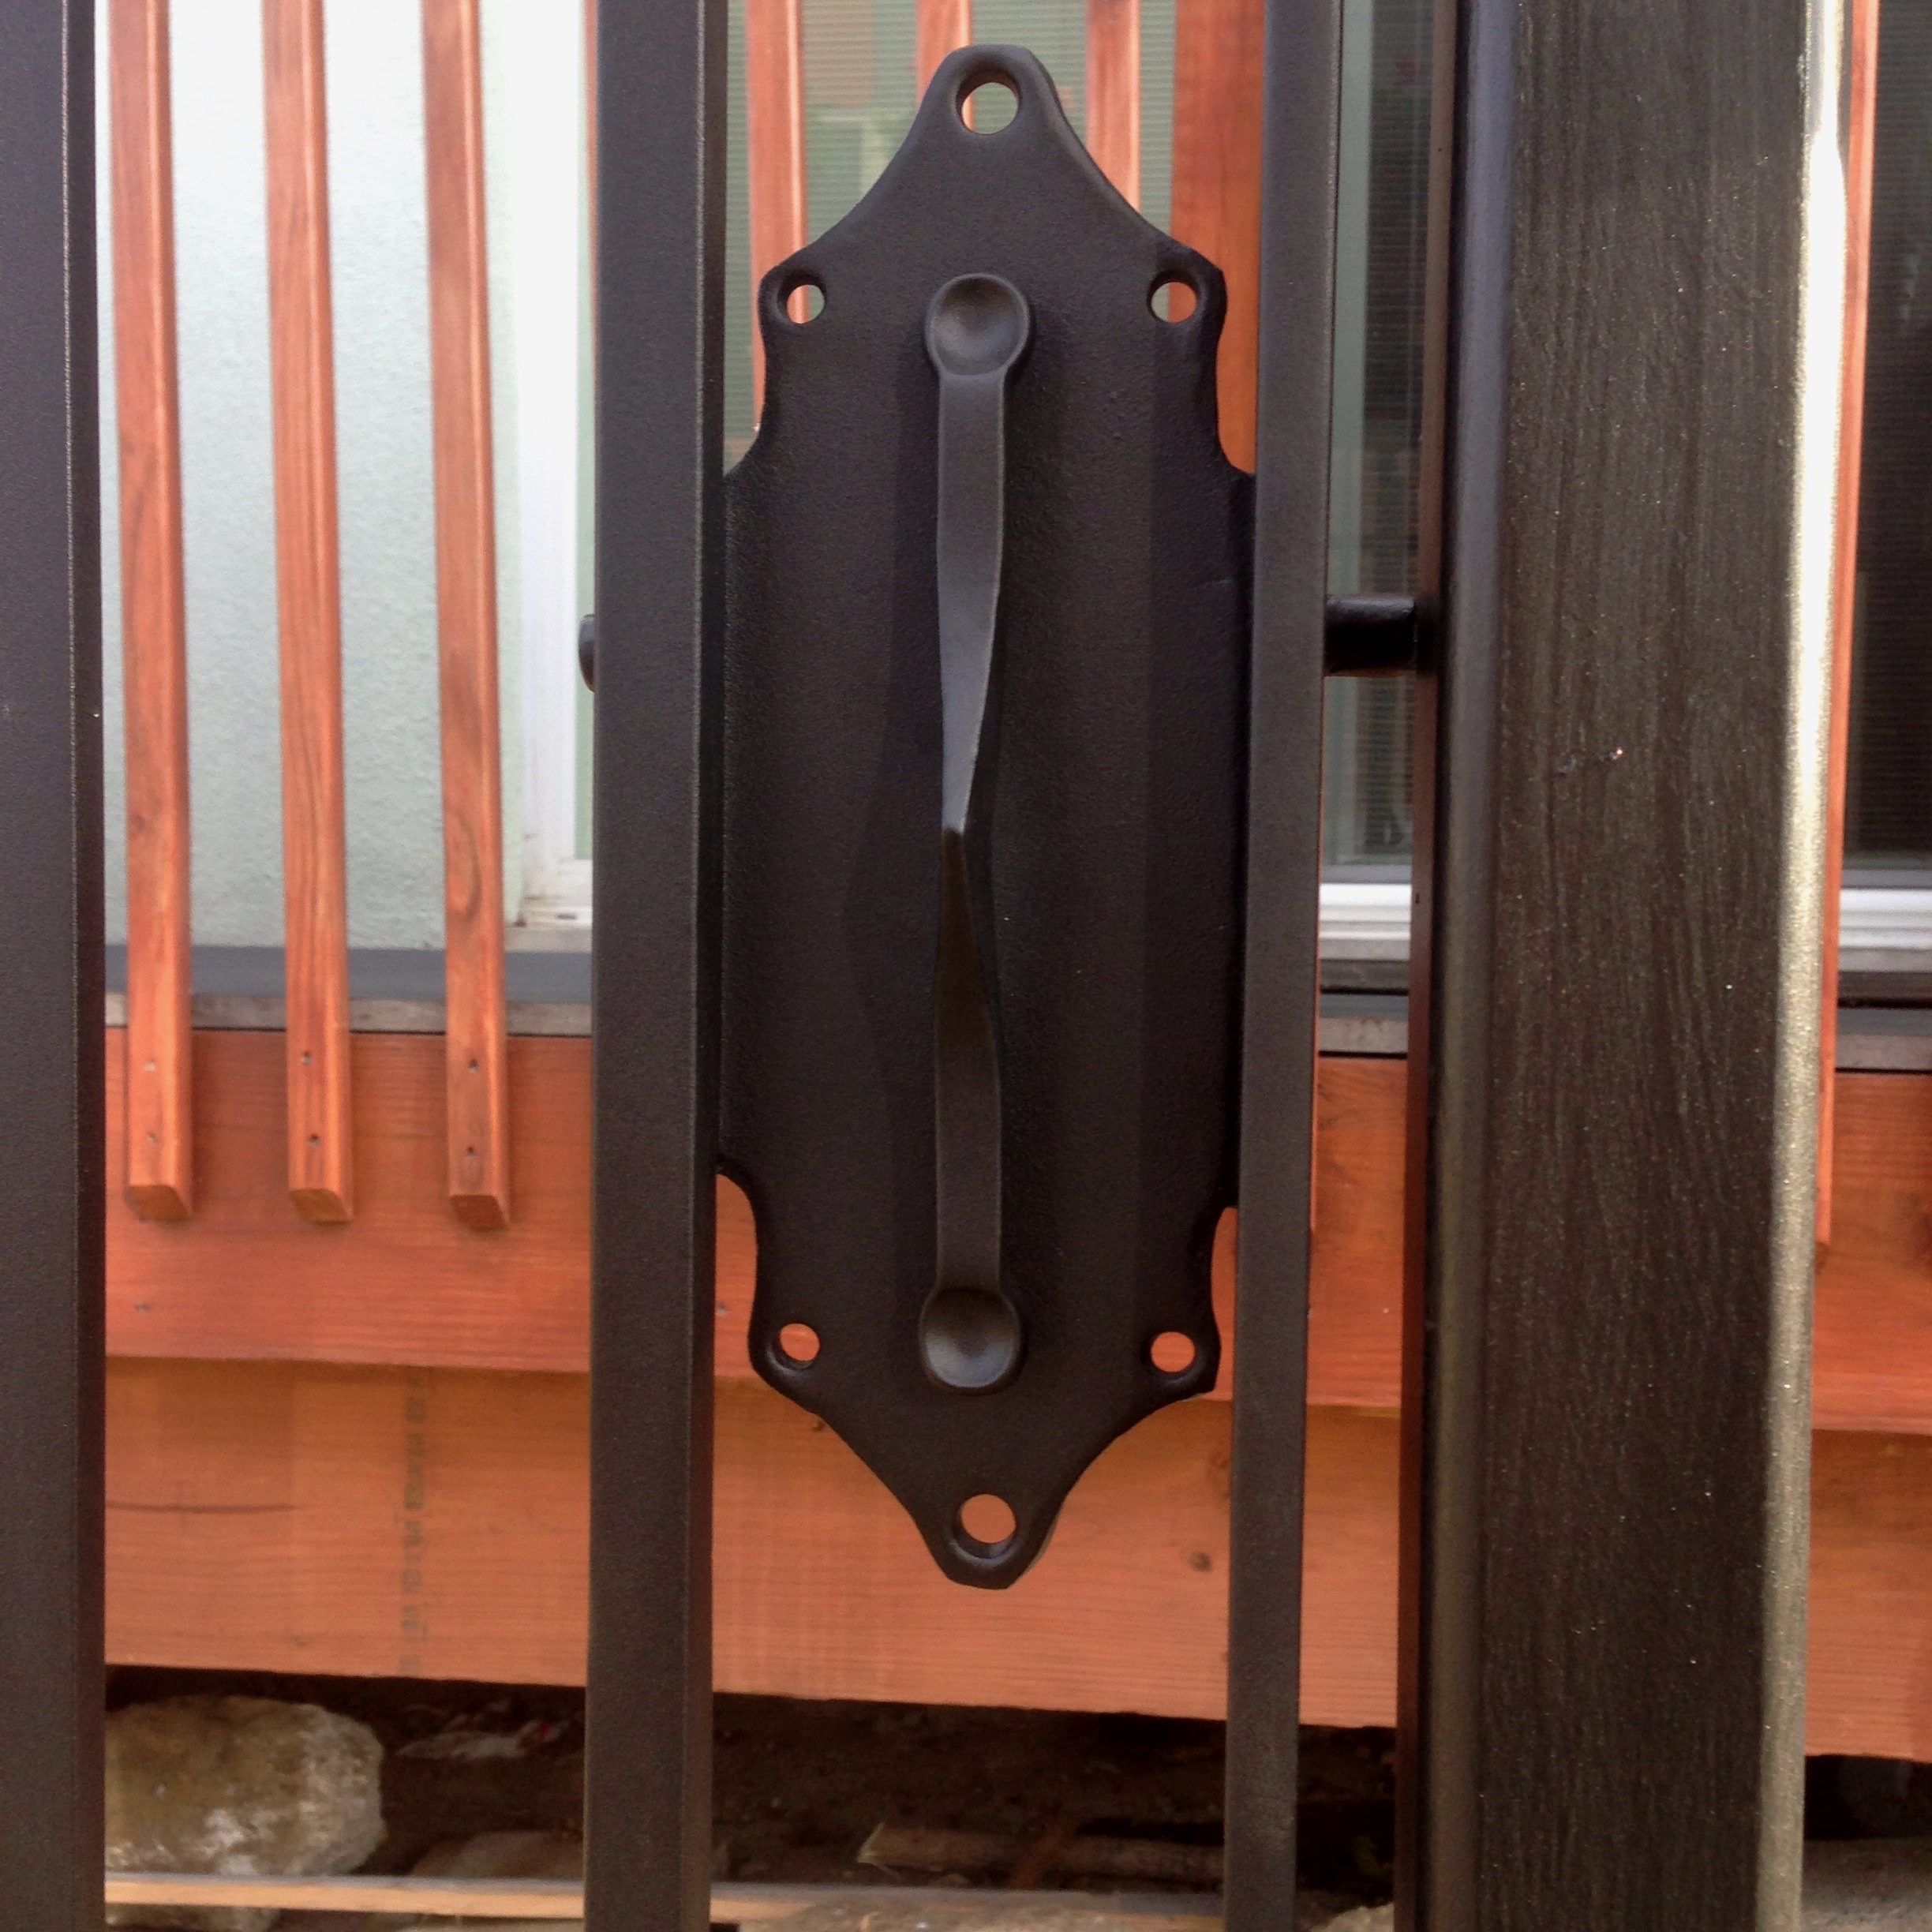 FORGED IRON FENCE (detail of lock plate)